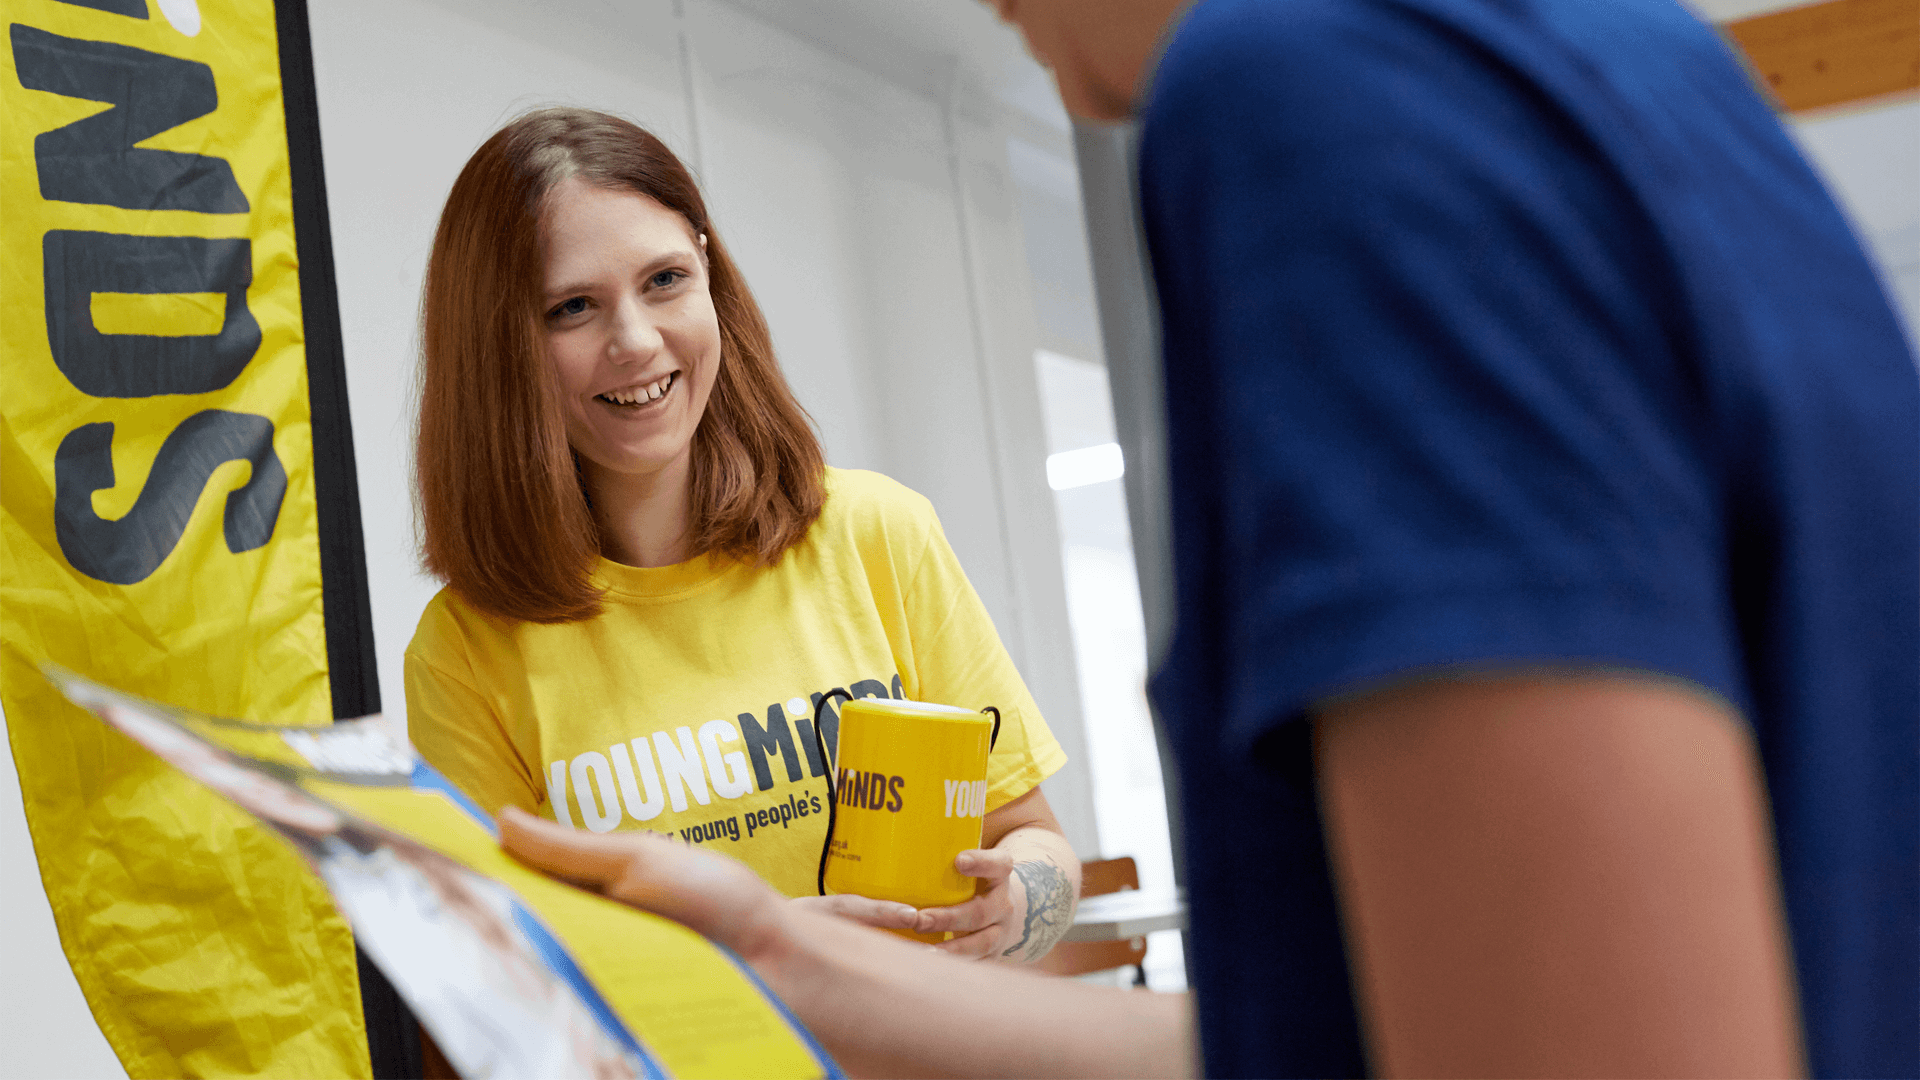 a YoungMinds volunteer wearing yellow YoungMinds shirt smiling in a fundraising event